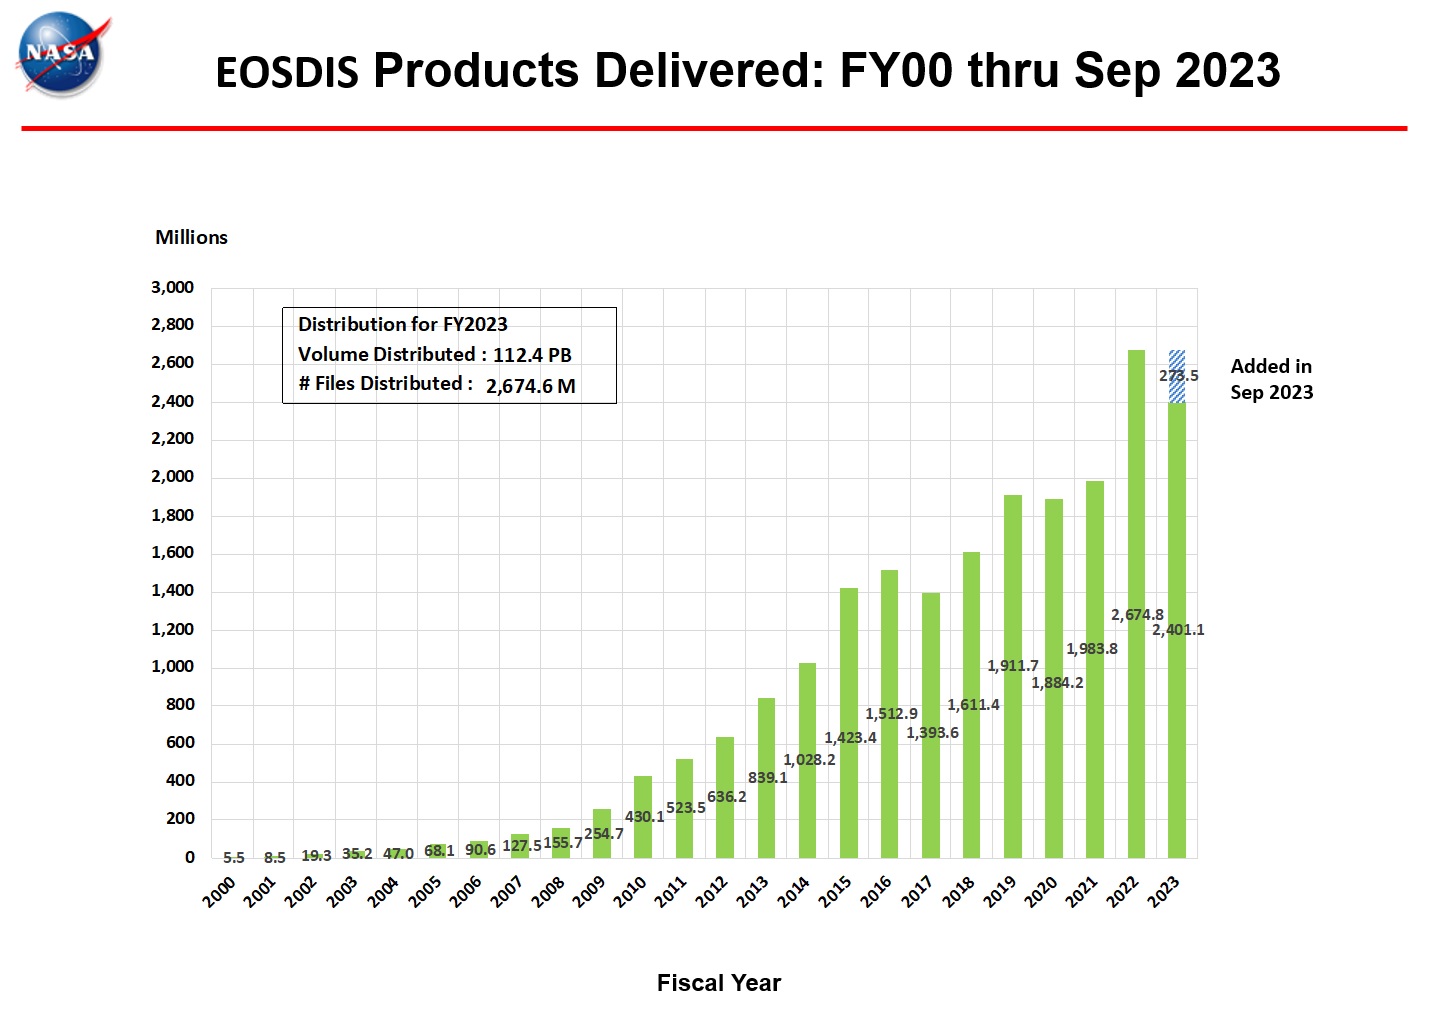 ESDIS-Monthly-Products_Delivered-1-Sept-23